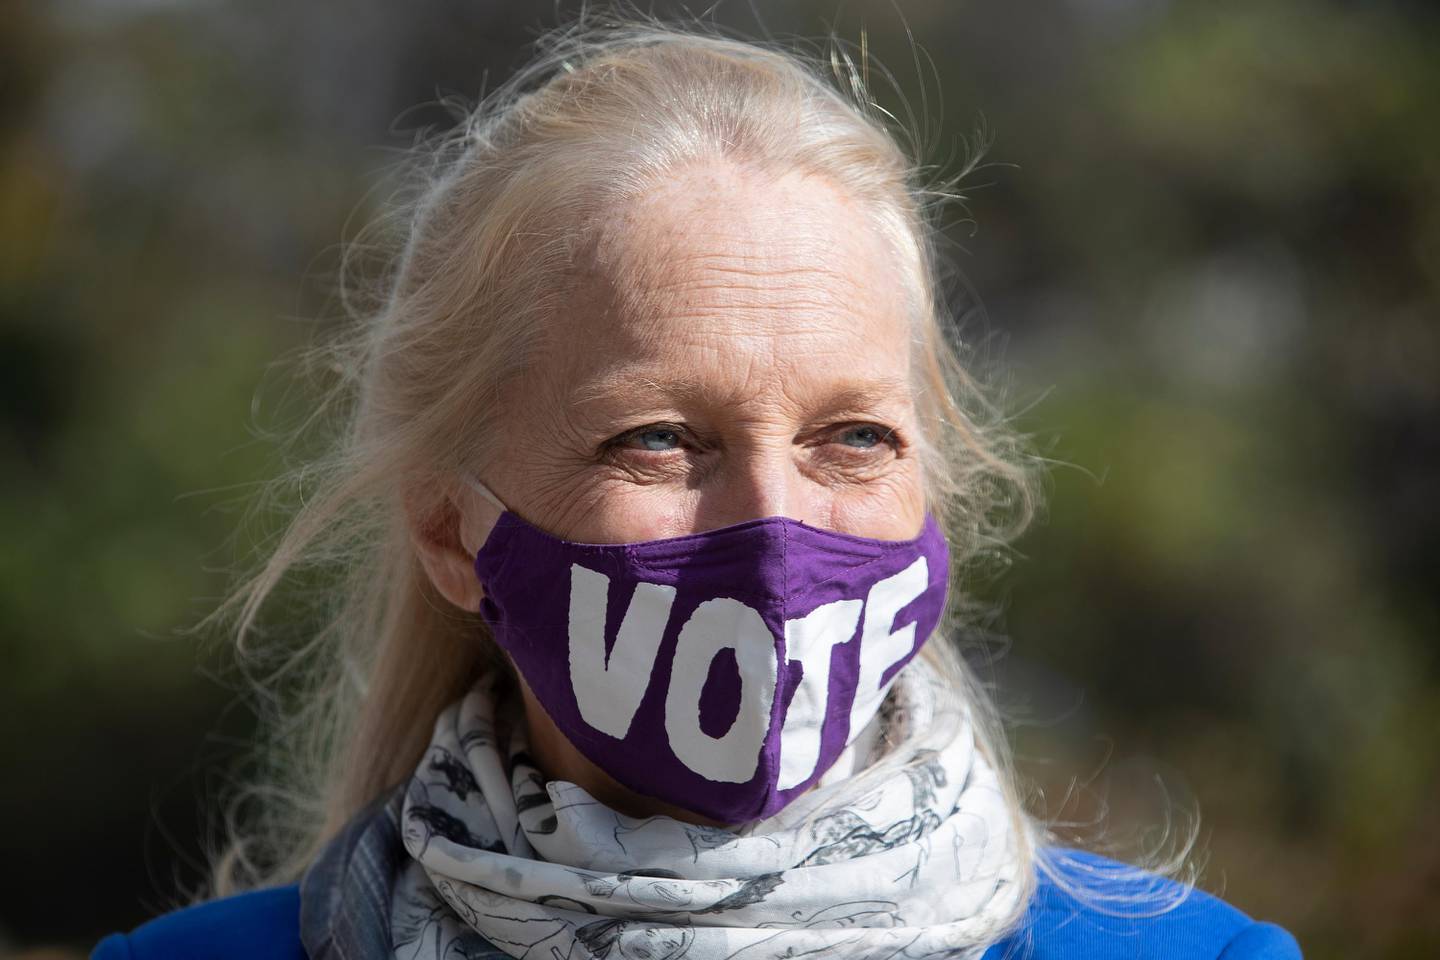 Congresswoman Mary Gay Scanlon wears a vote mask as she stops at at a polling location in Brookhaven, Delaware County, Pa. on Tuesday, Nov. 3, 2020. (Charles Fox/The Philadelphia Inquirer via AP)